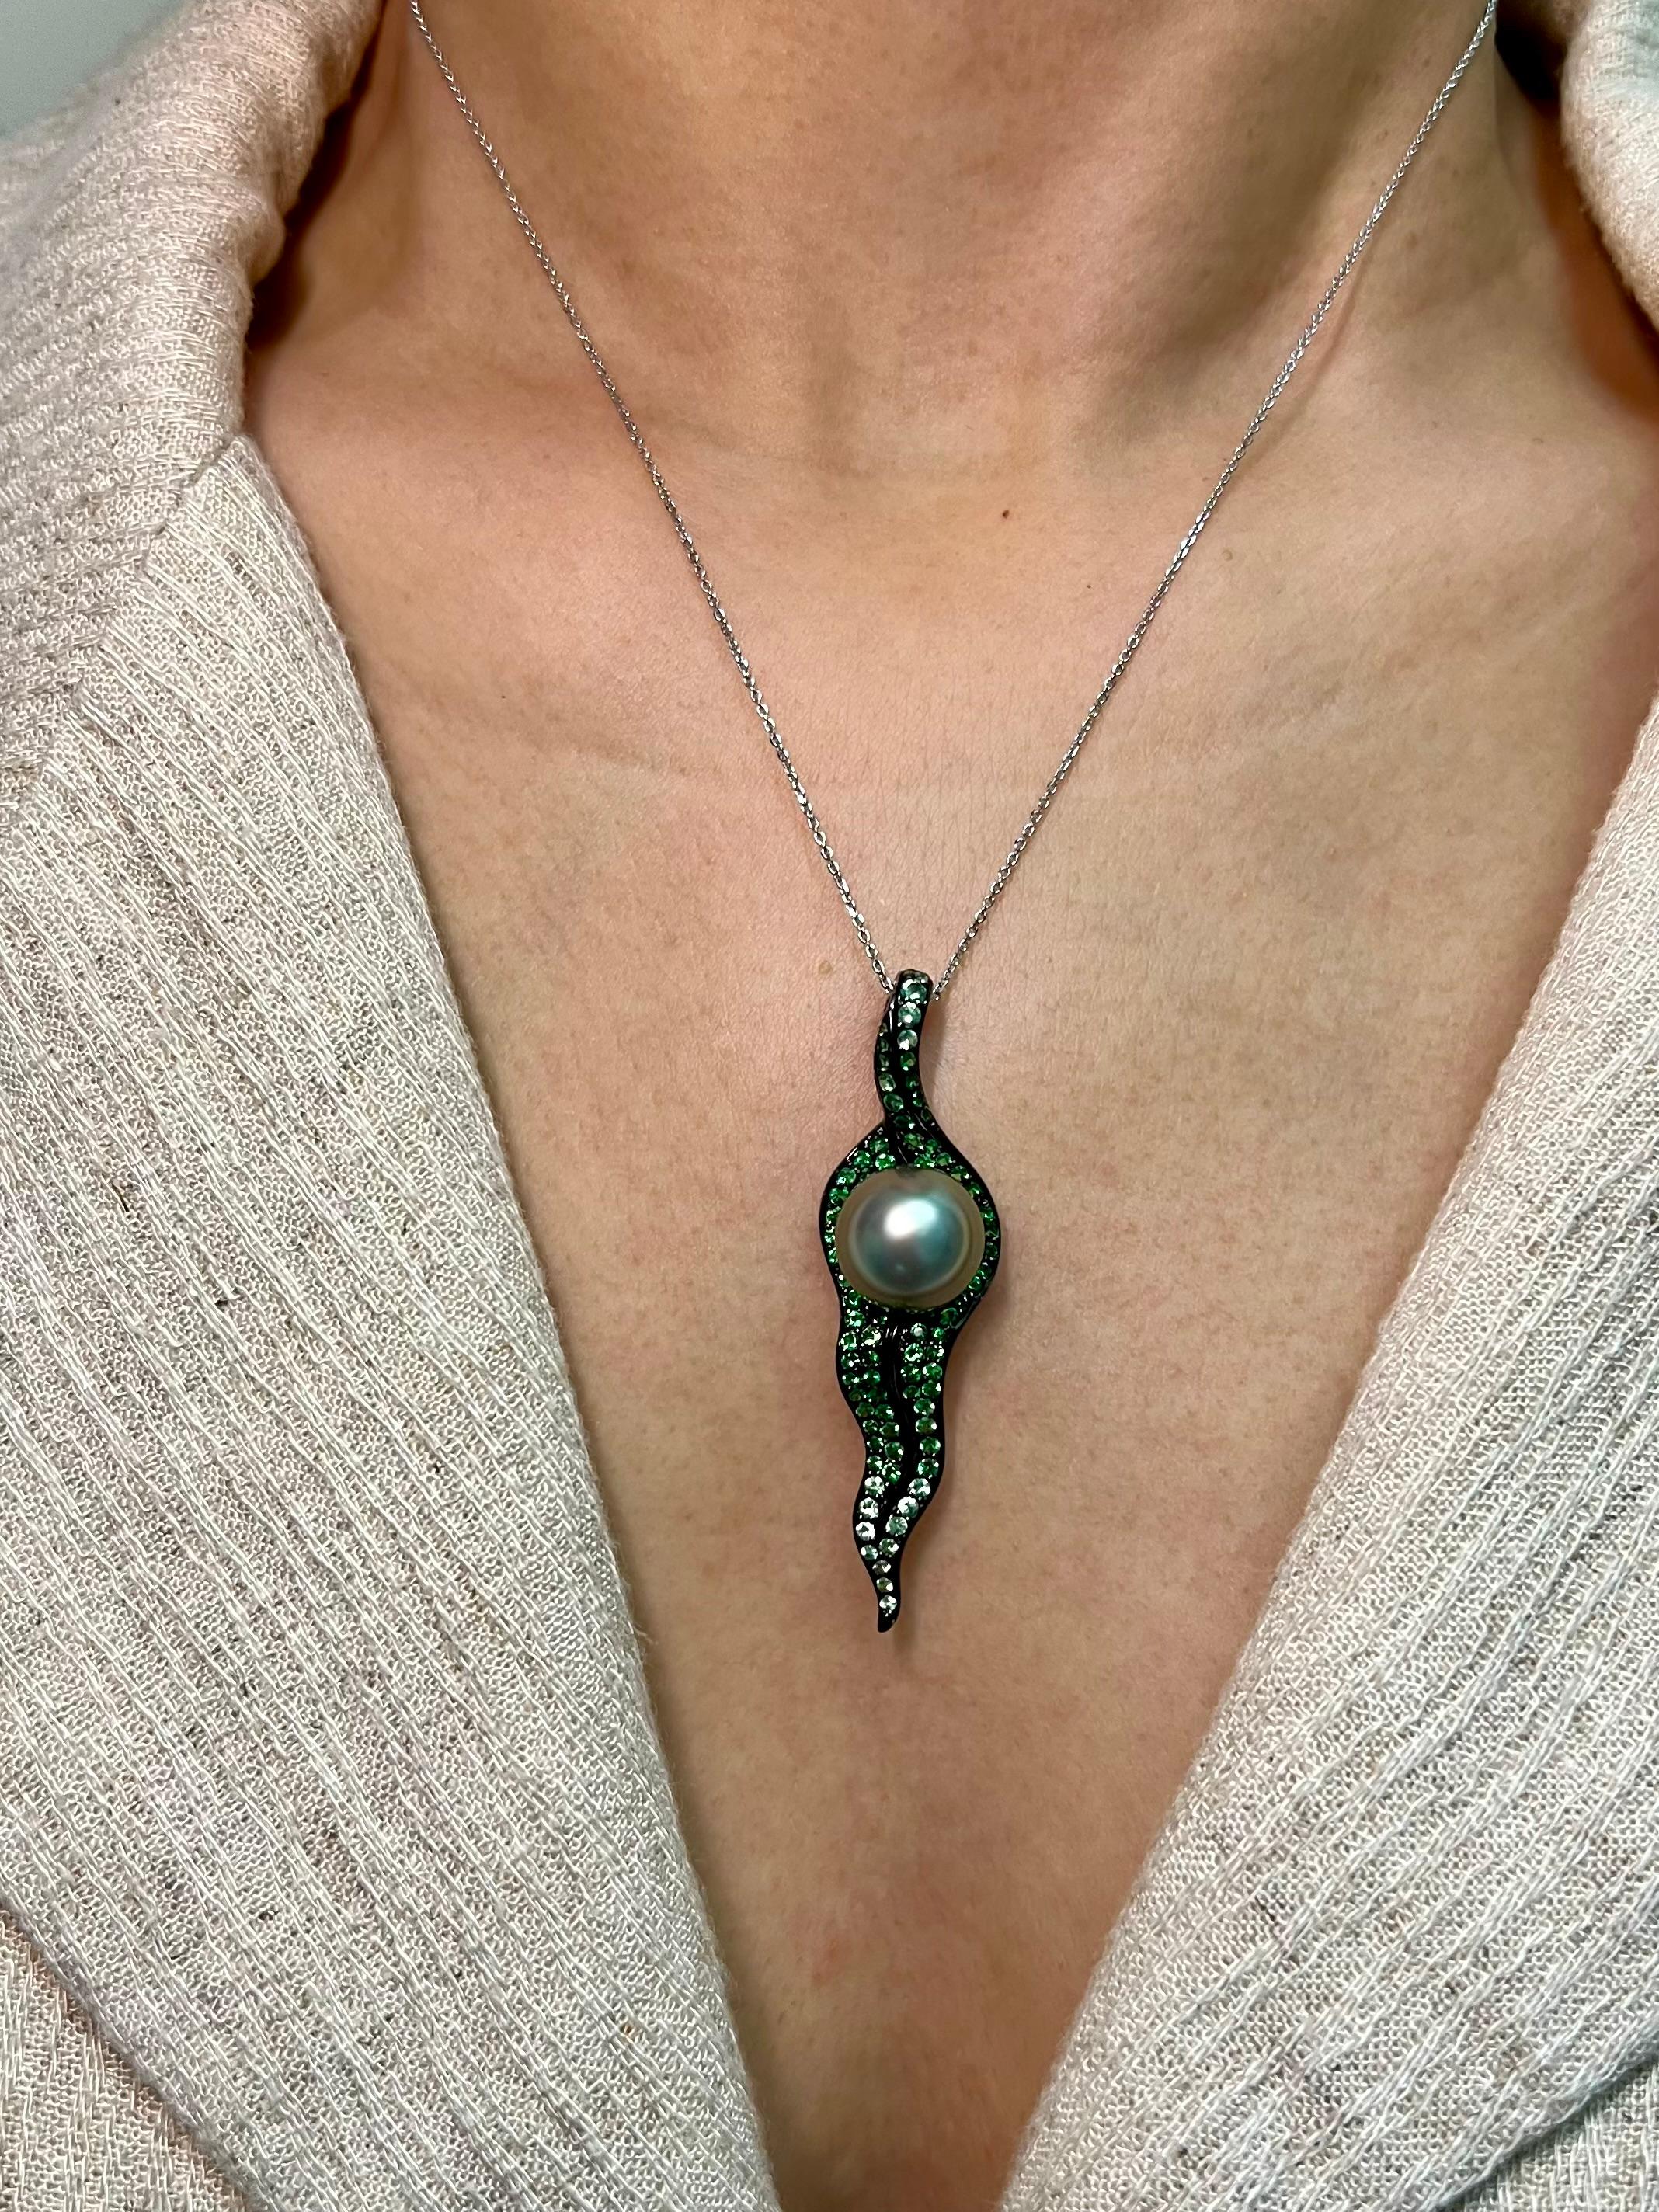 Please check out the HD video. This contemporary pendant has a unique look and design. You can wear it dressed up or down. The pendant is about 5.5cm x 1.5cm. This pendant is made in 18k white gold that has been blackened (oxidized) and set with one